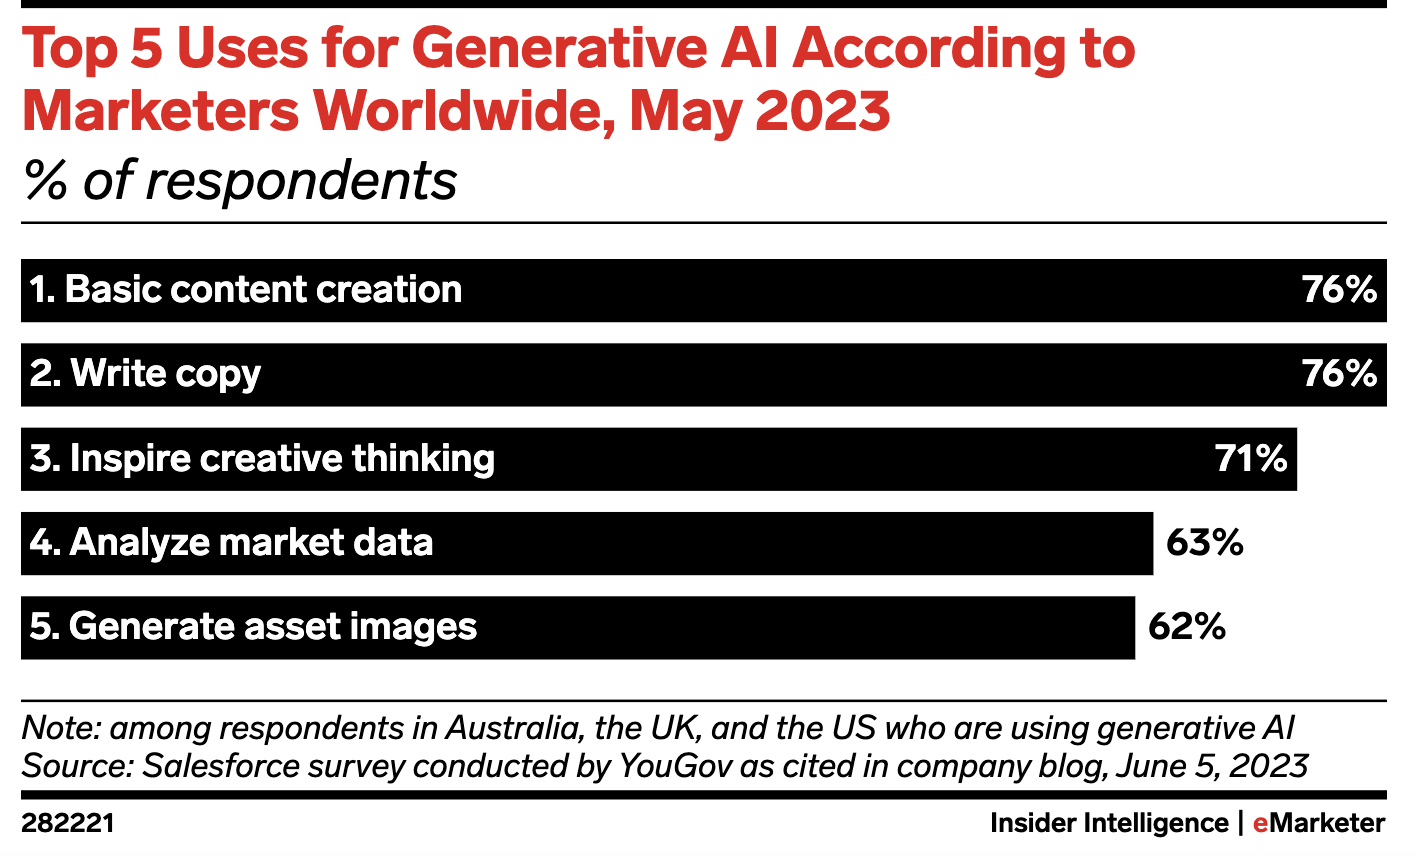 Top 5 uses for generative AI according to marketers worldwide, May 2023